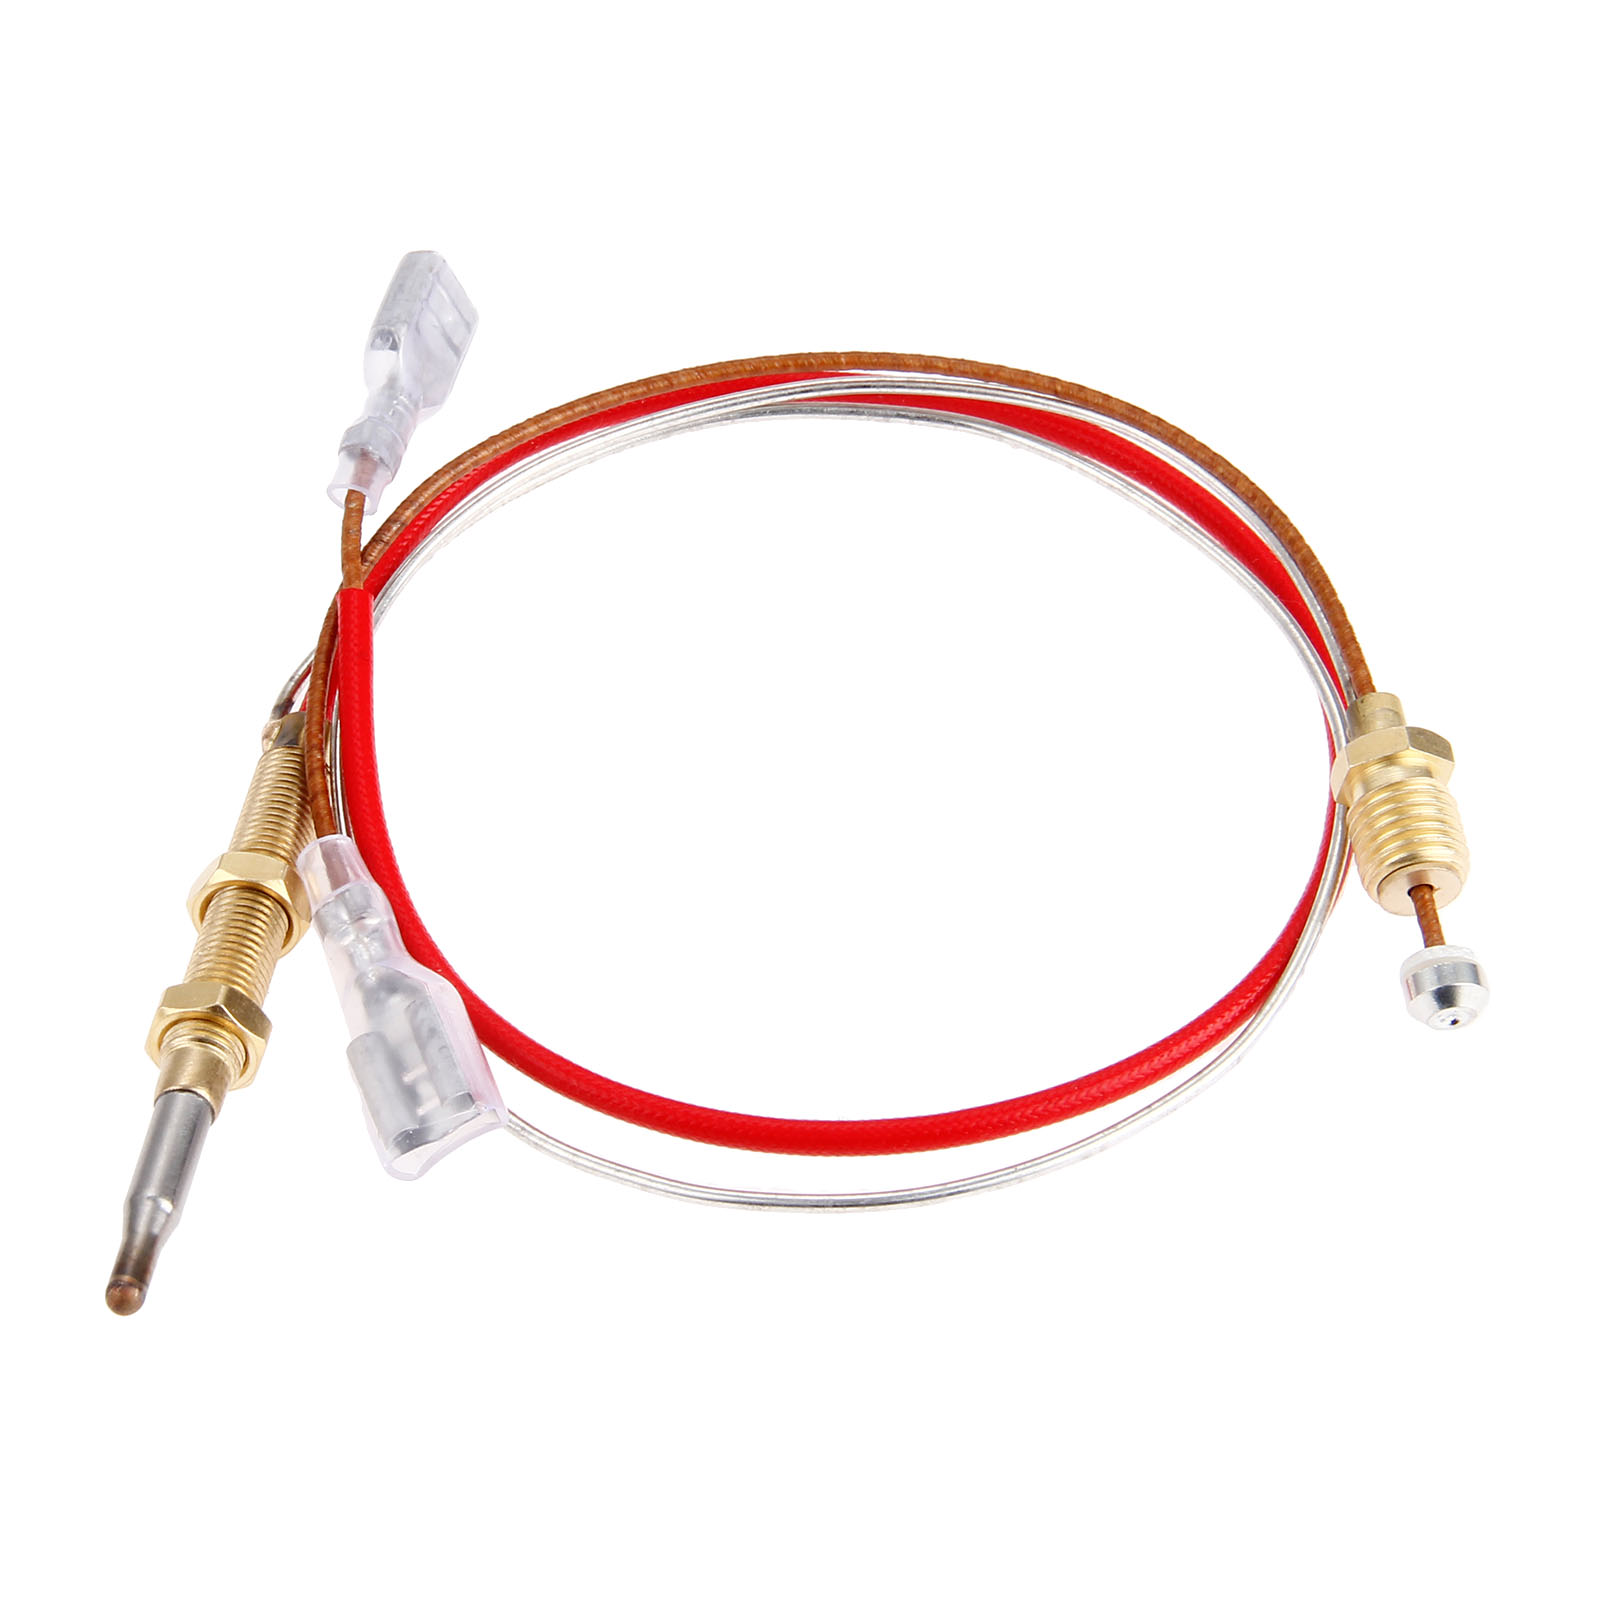 1 Pc 410mm Universal Thermocouple for Outdoor Gas Patio Heater M6*0.75 Thread on Head M8x1 End Connection Fireplace Stoves Parts